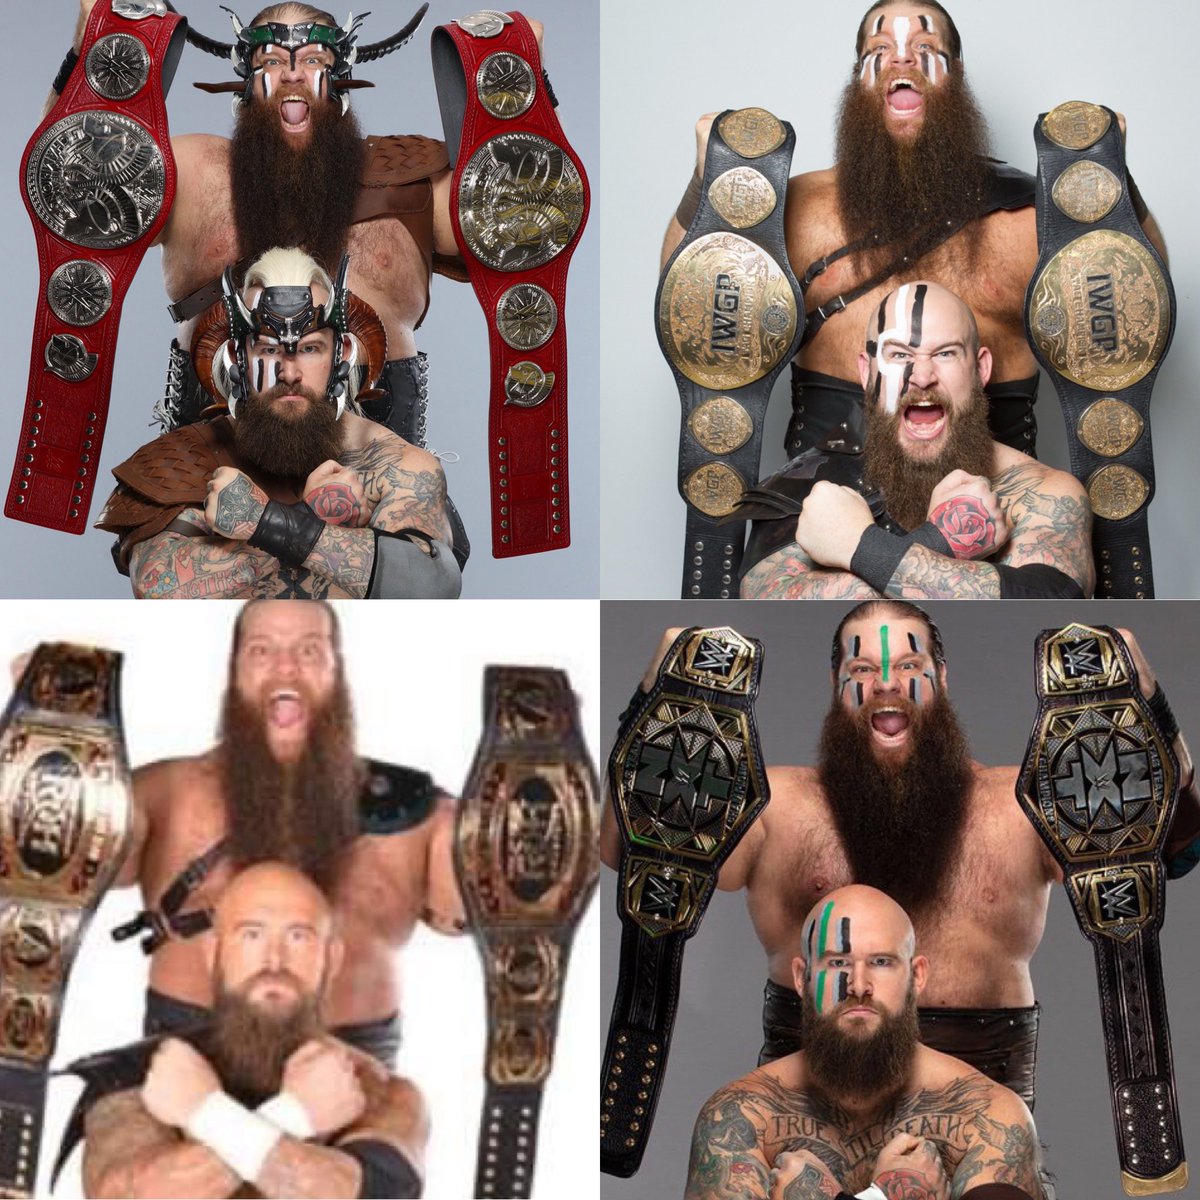 First tag team in history to win IWGP, ROH, NXT, and WWE RAW Tag Team Championships.  Regardless of the name, it has always been the same result. World Domination. 

#vikingraiders #warraiders #warmachine @Ivar_WWE #iwgp #njpw #roh #nxt #wwe #raw #worlddomination #jointheraid